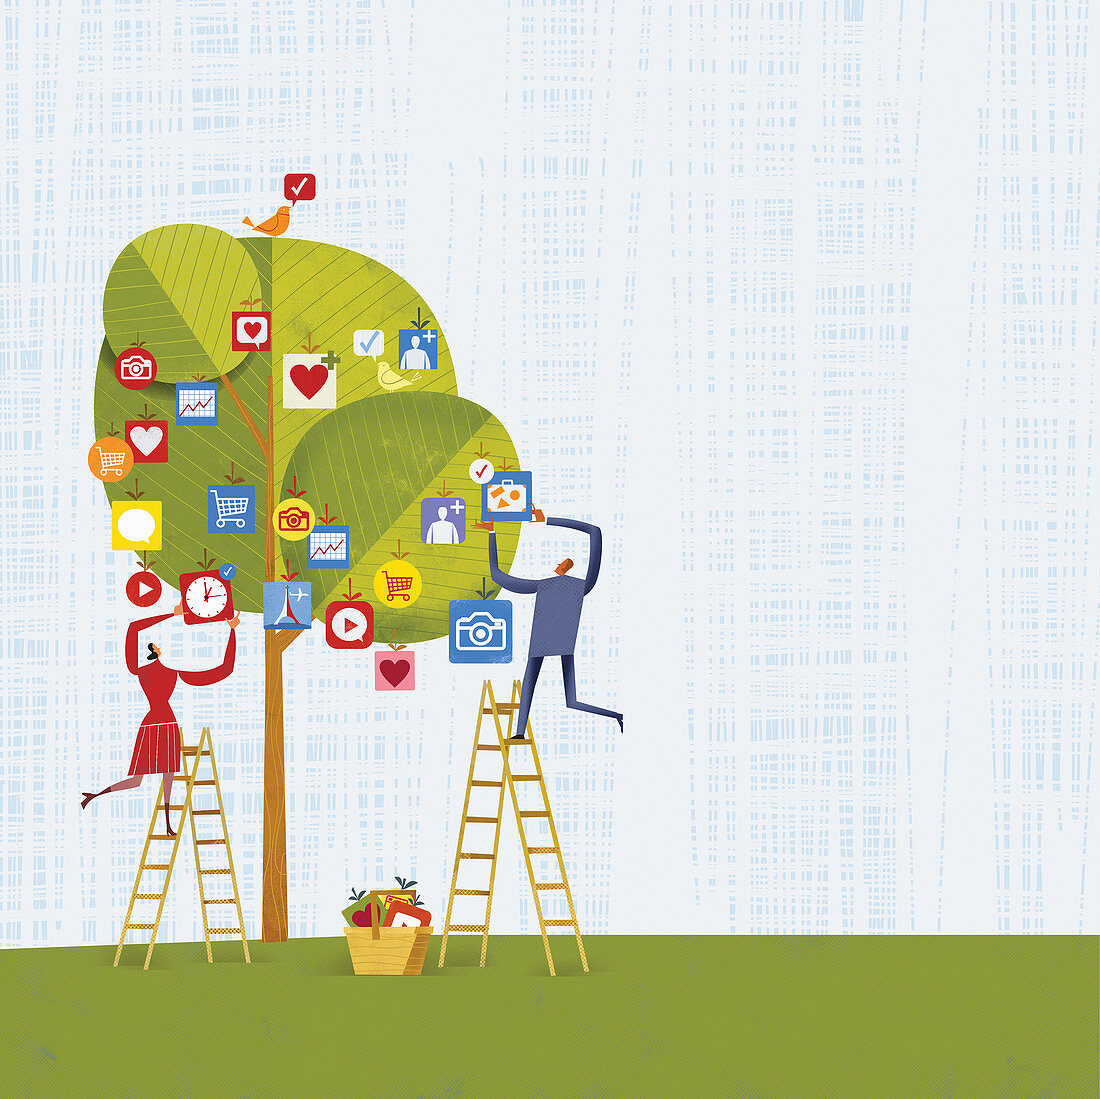 Man and woman picking mobile apps from tree, illustration